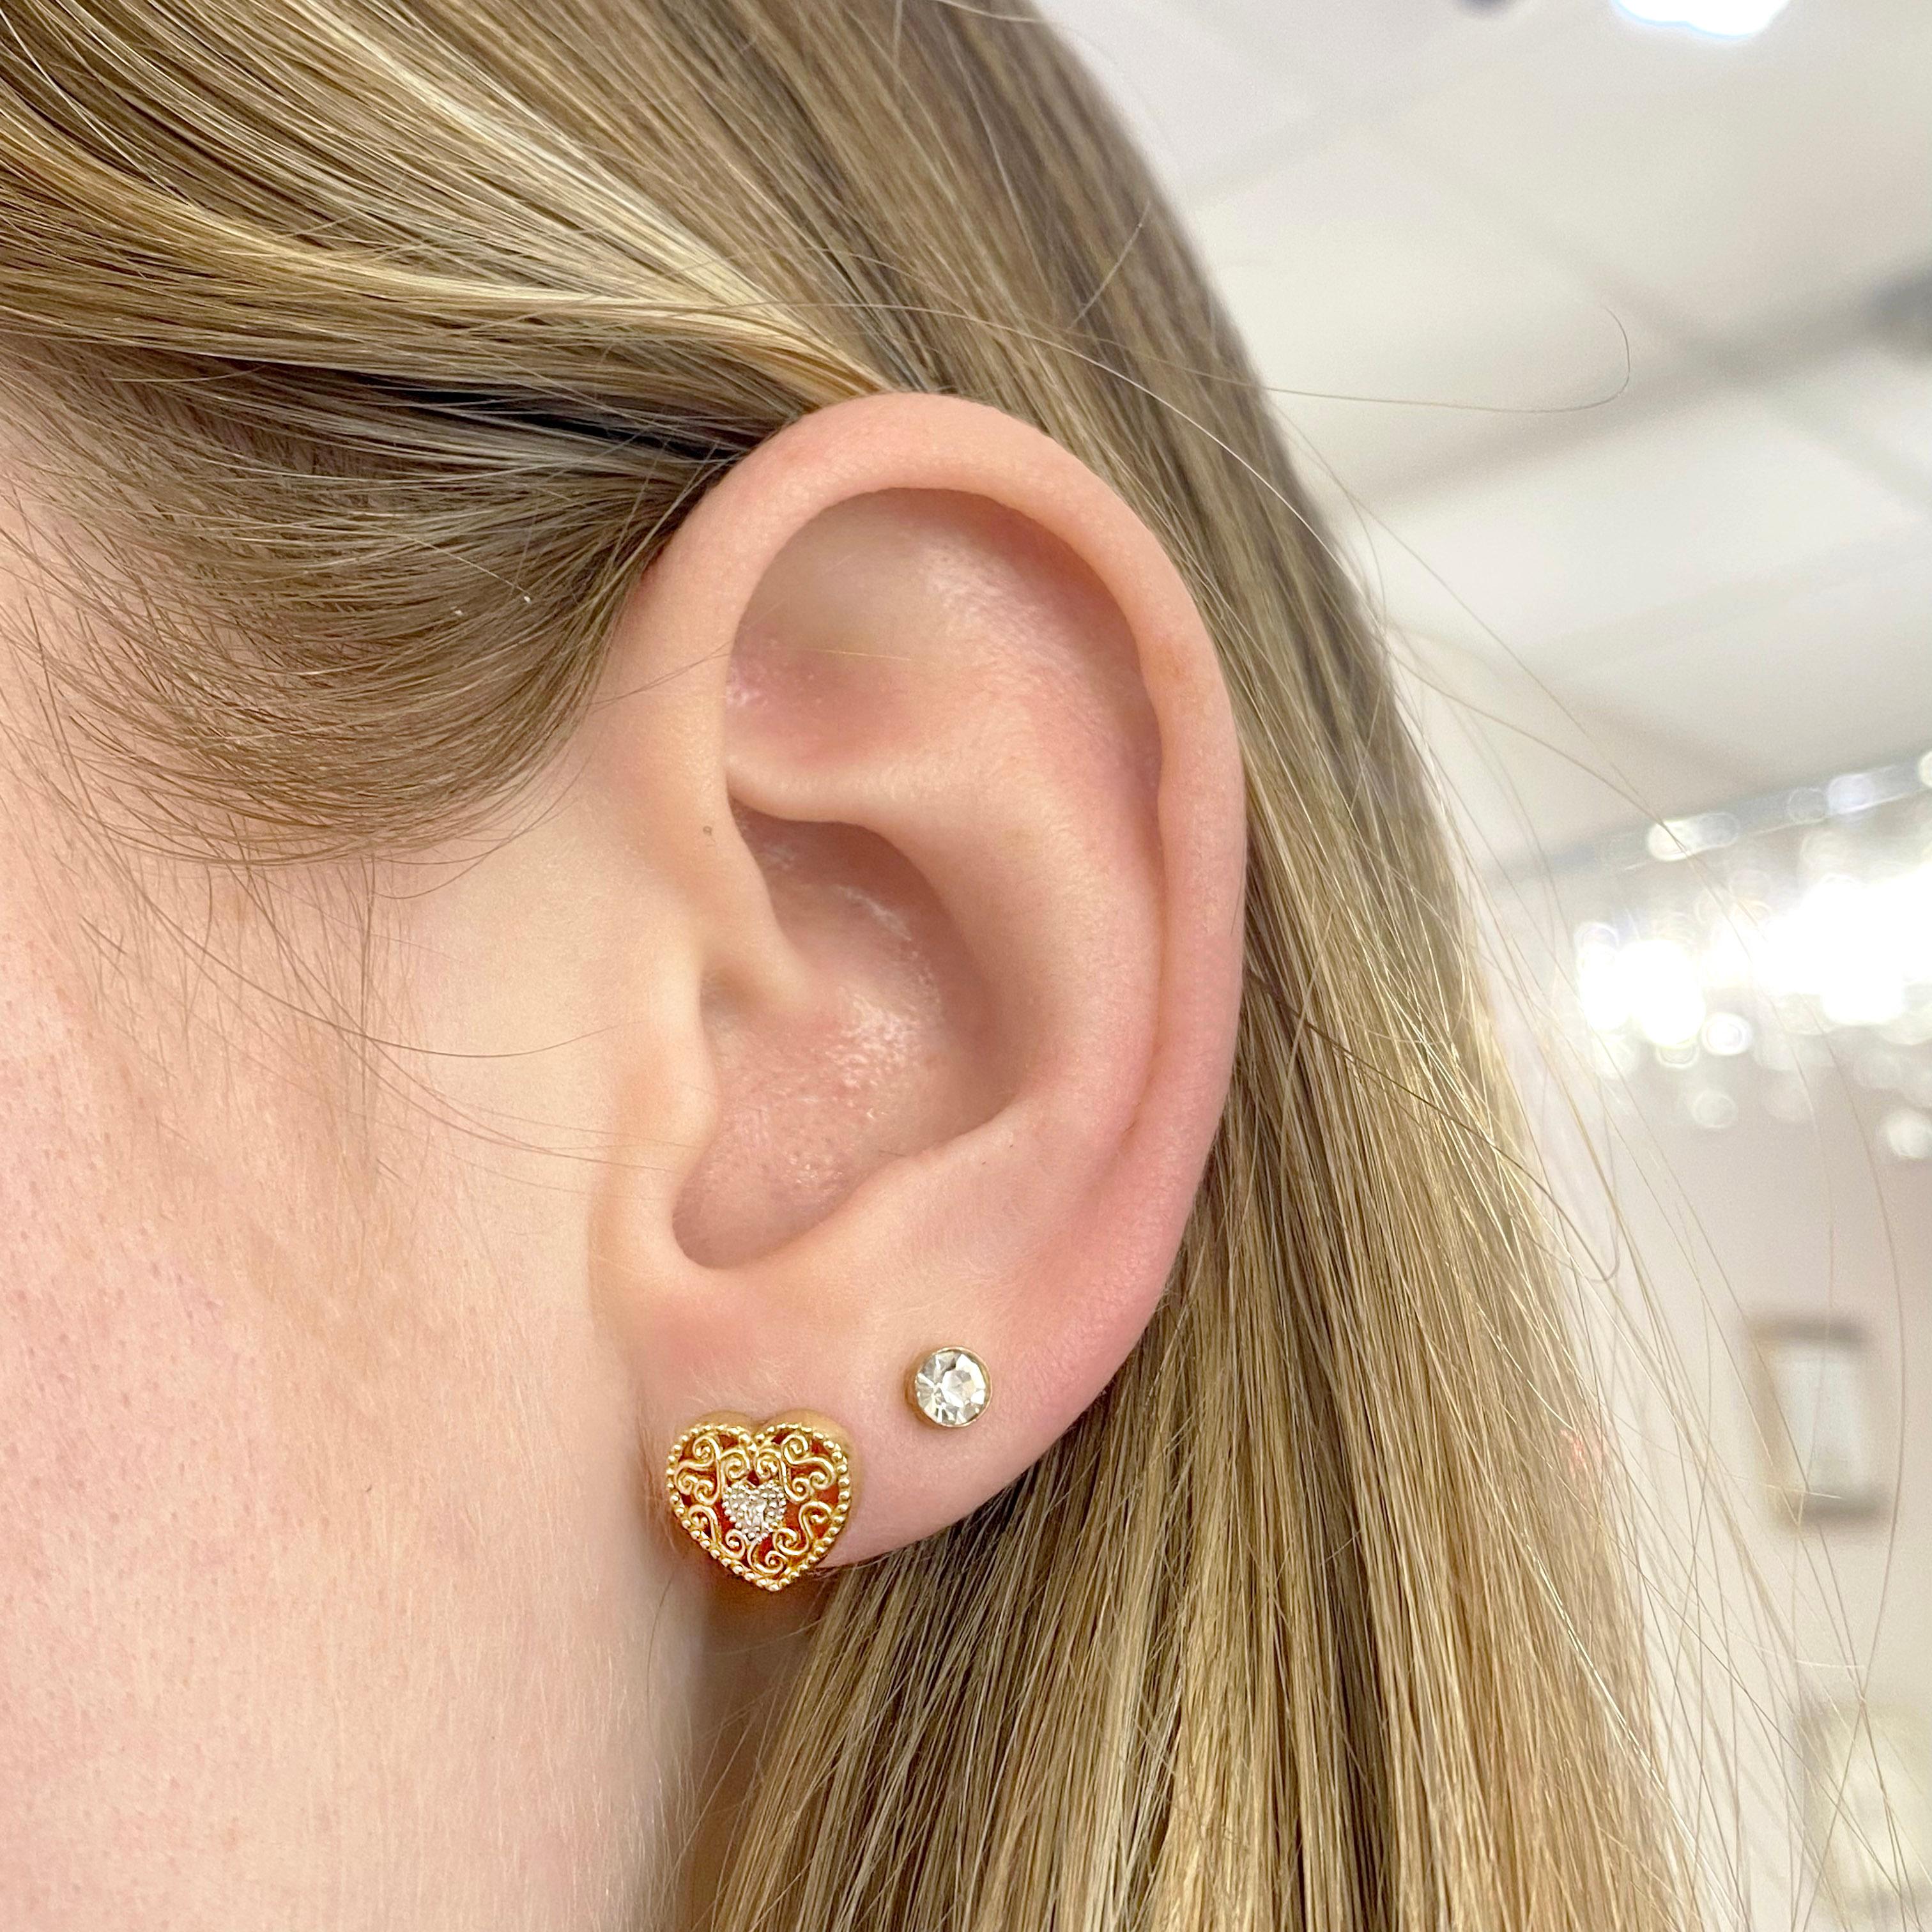 These stunning heart shaped earrings provide a look that is both trendy and classic. Each stud has a single diamond and intricate filigree which makes these earrings so special. This set is a great staple to add to your collection, and can be worn